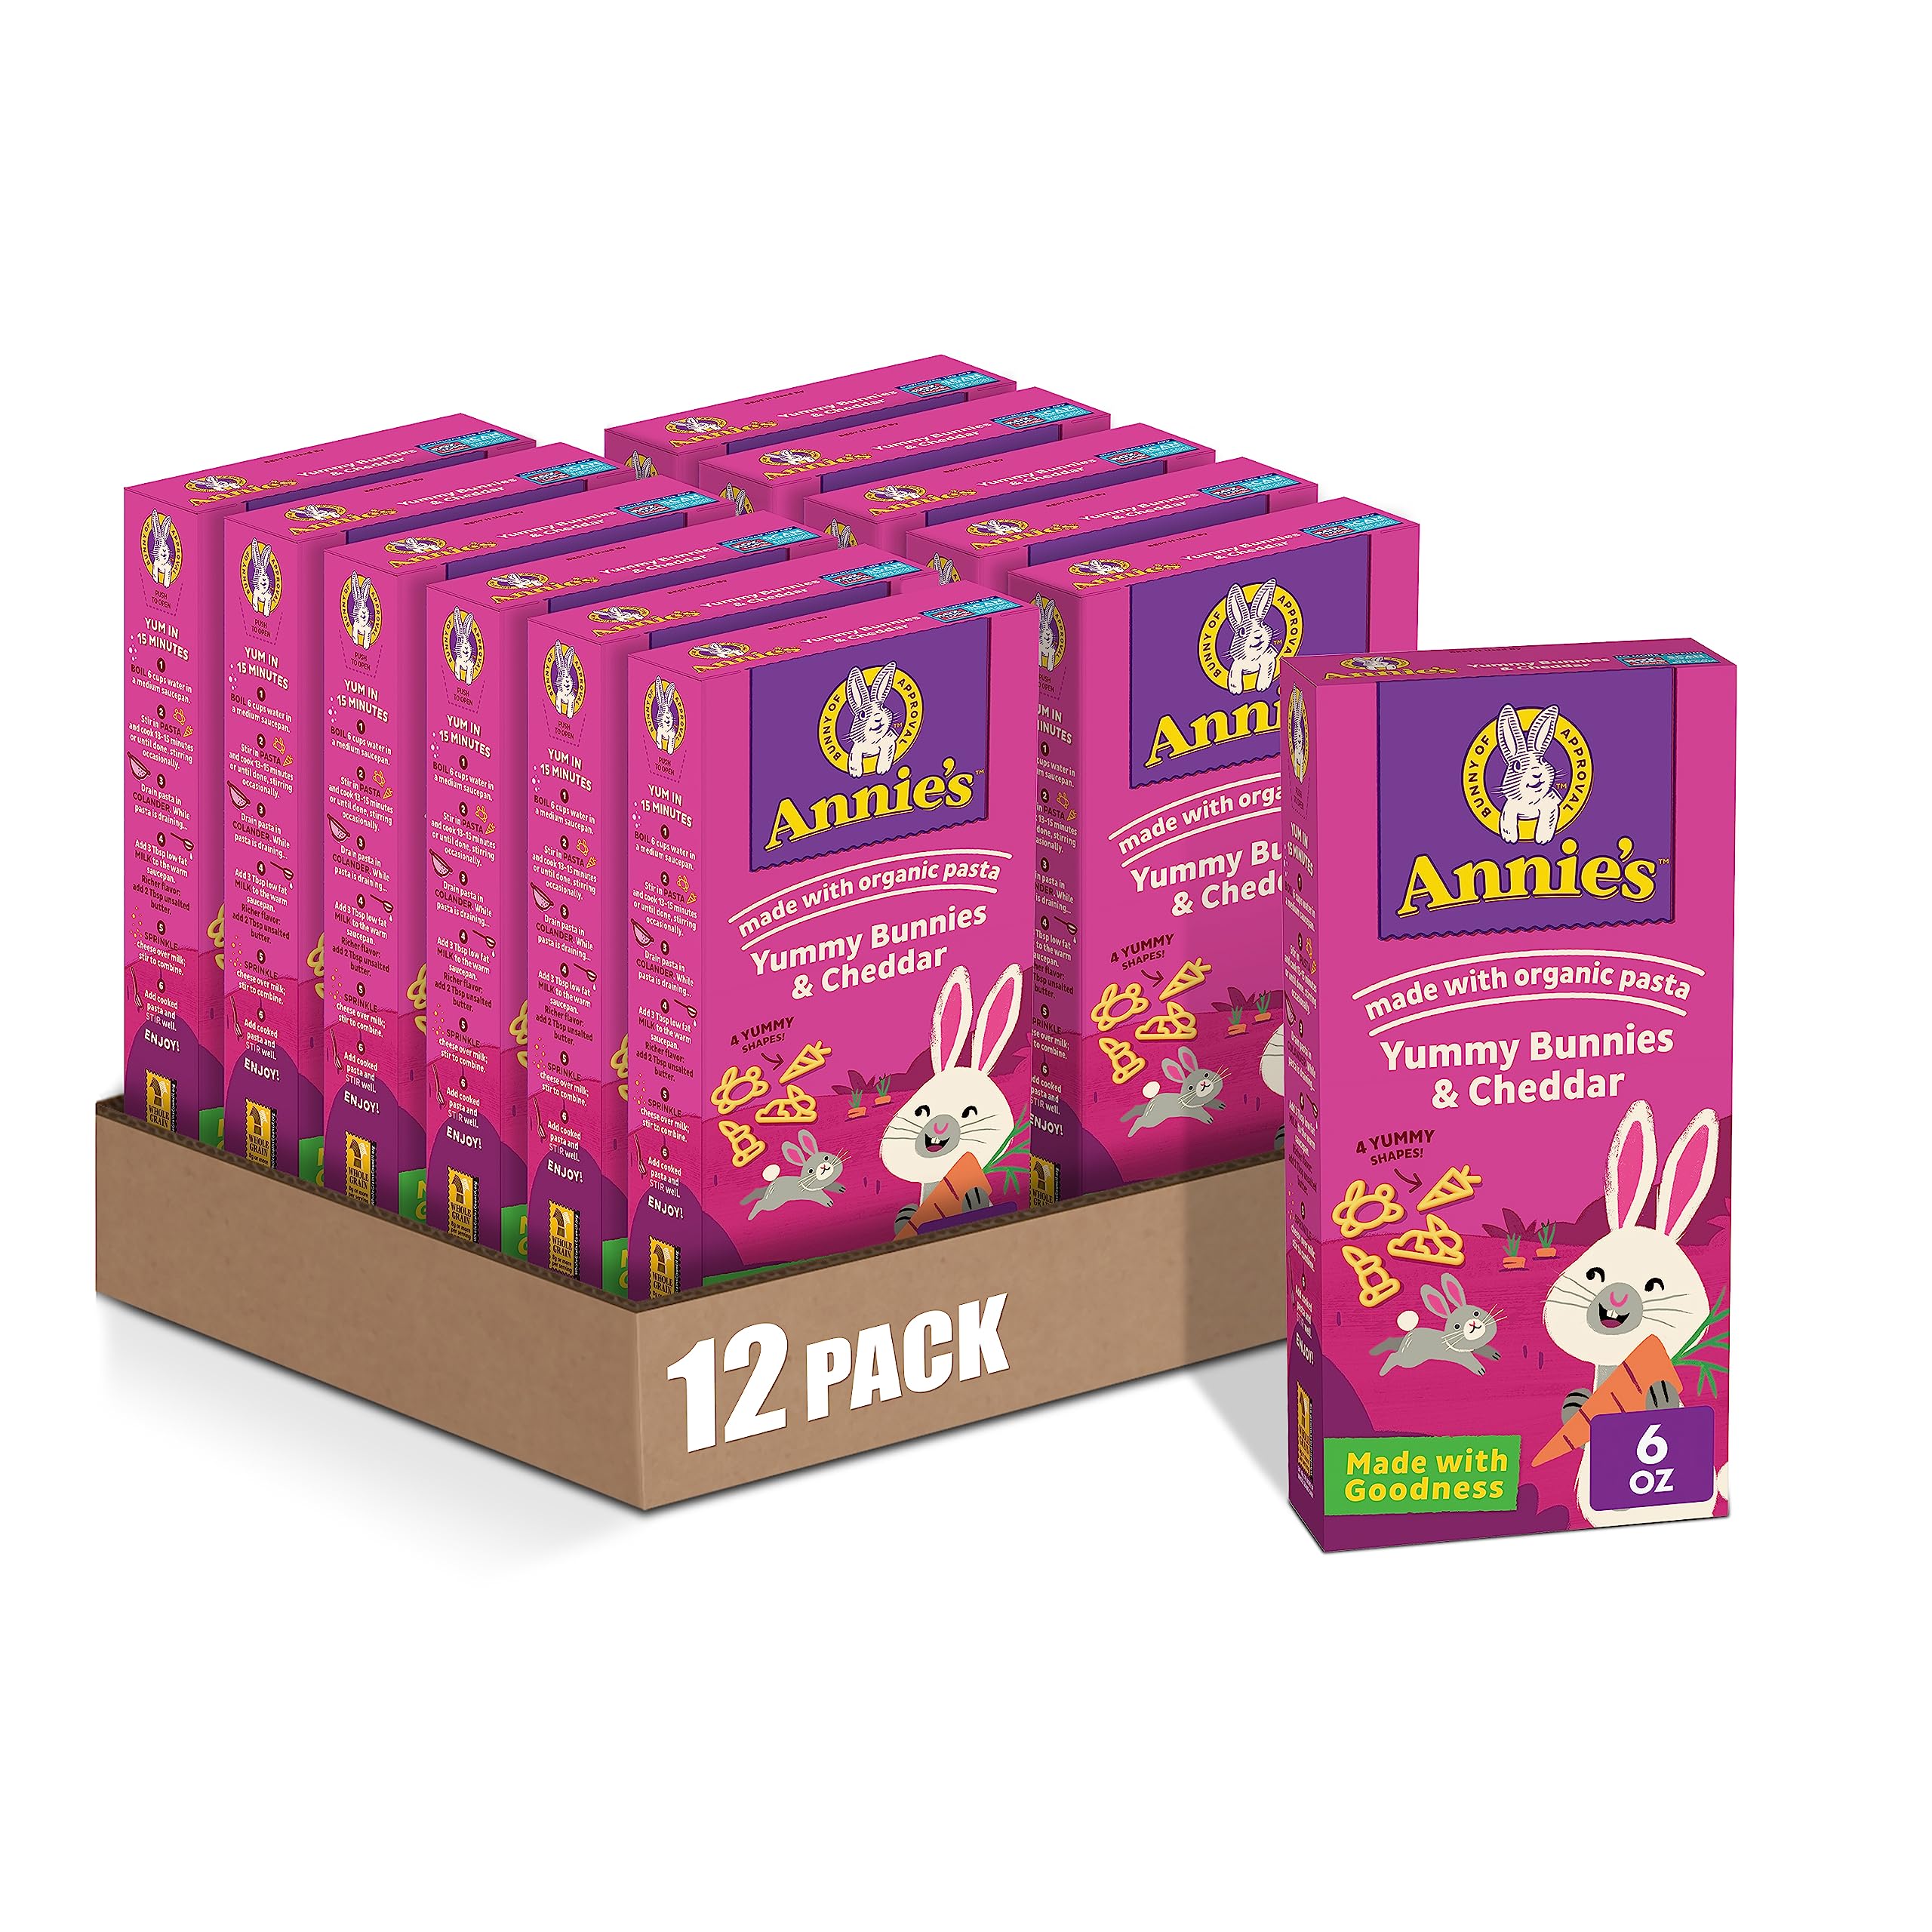 12-Pack 6-Oz Annie's Macaroni & Cheese Yummy Bunnies & Cheddar $10.62 ($0.89 each) w/ S&S + Free Shipping w/ Prime or on $35+